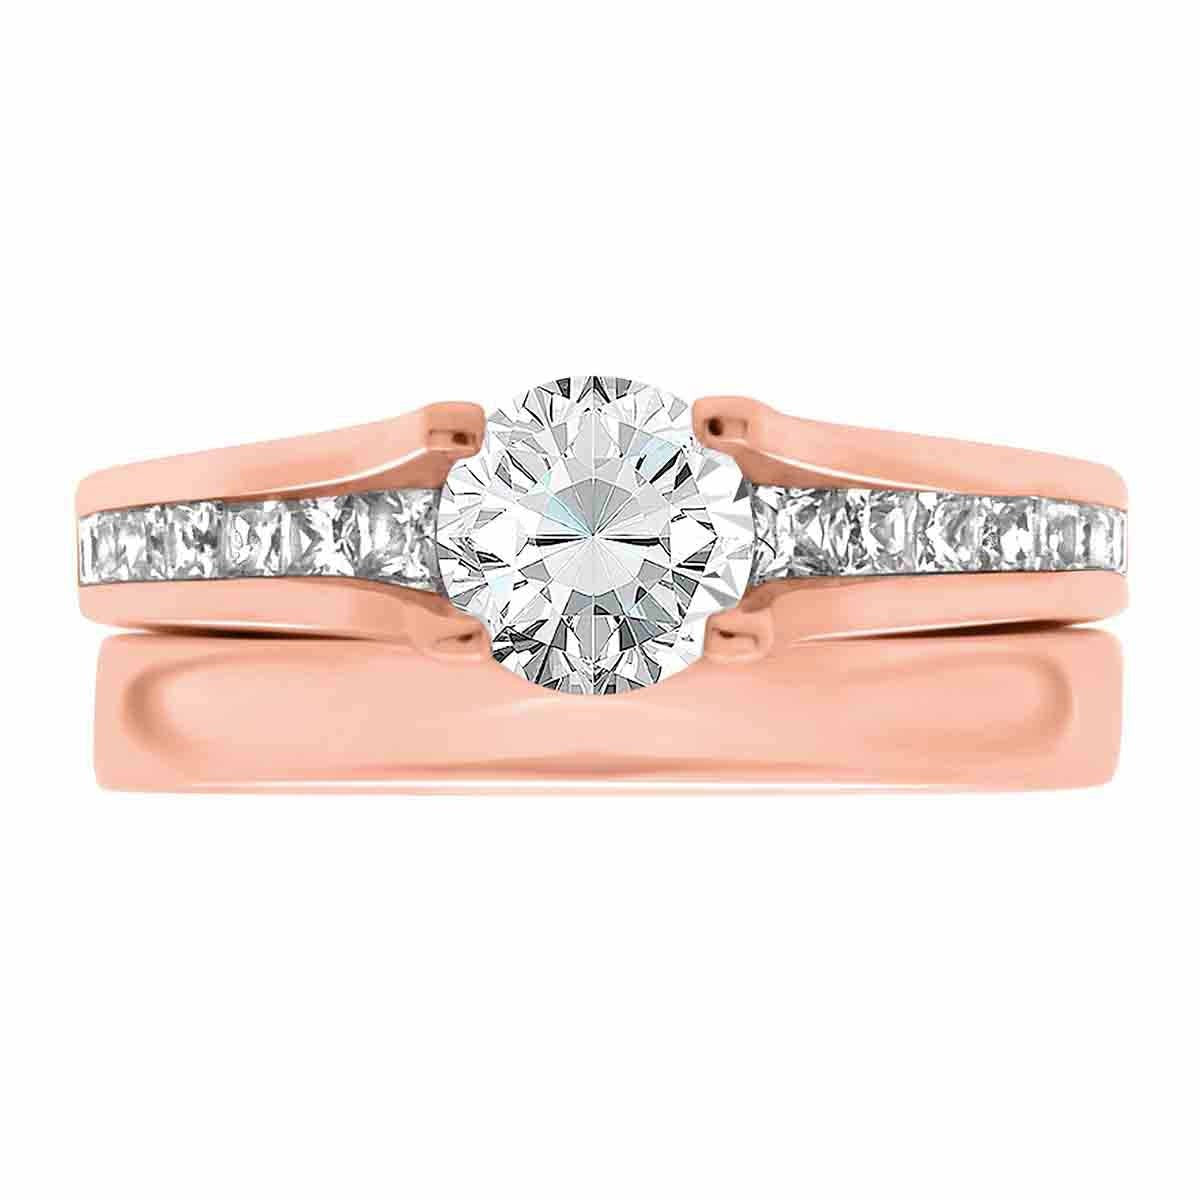 Channel Set Diamond Ring set in rose gold pictured with a plain wedding ring